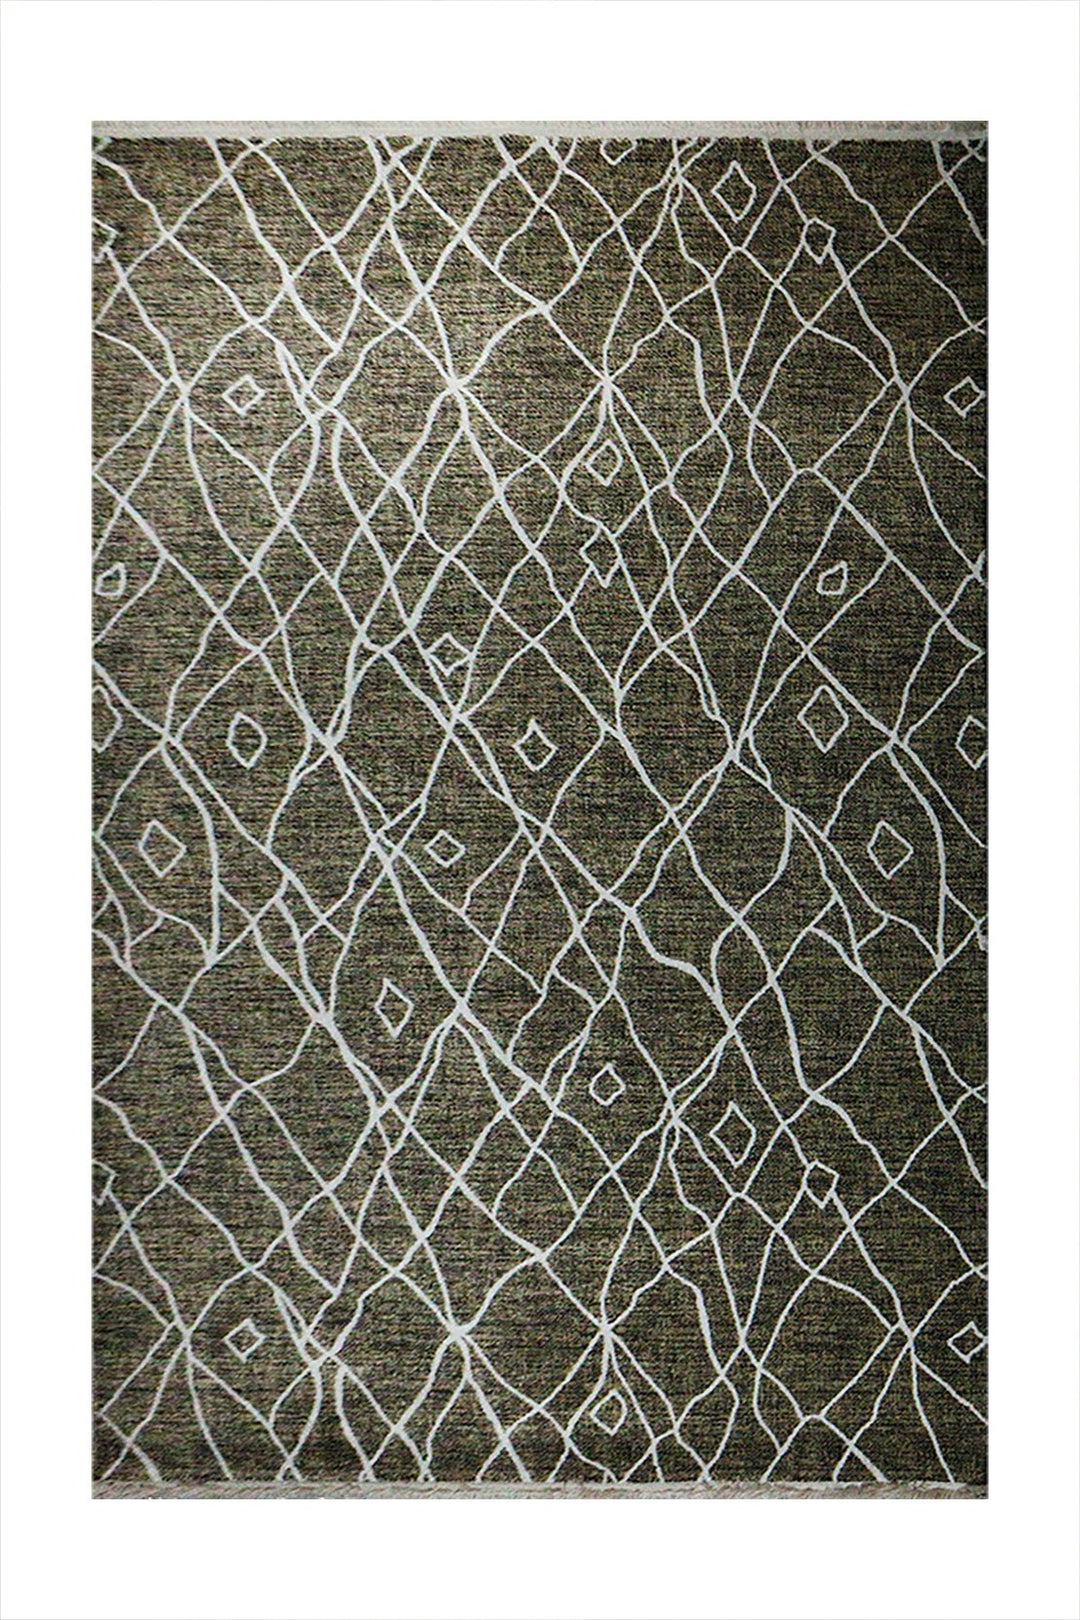 Turkish Modern Festival WD Rug - 6.5 x 9.5 FT - Yellow - Superior Comfort, Modern Style Accent Rugs - V Surfaces